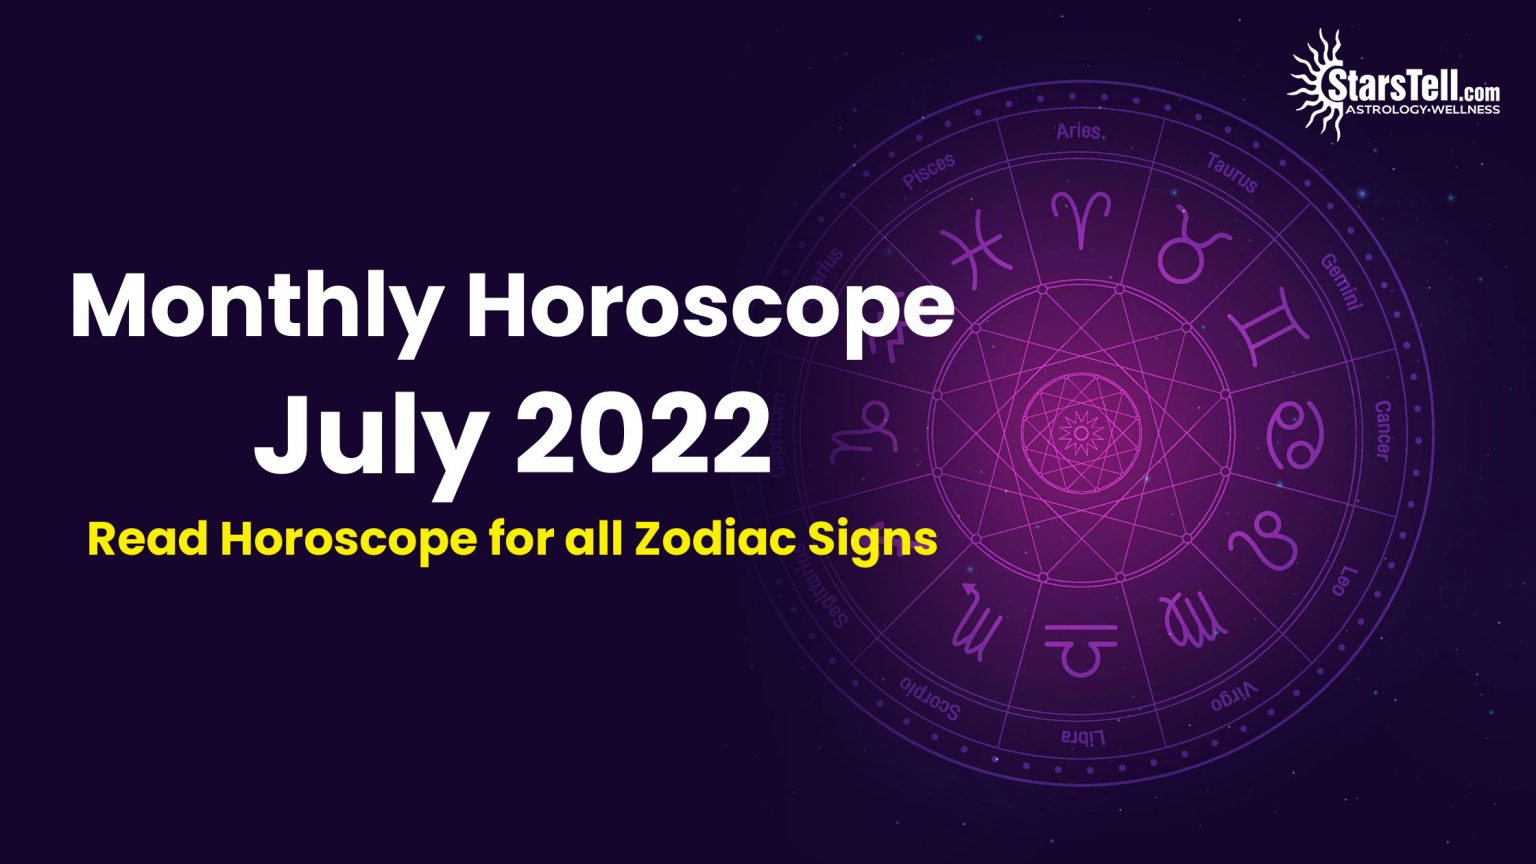 Monthly Horoscope July 2022 Read Horoscope for all zodiac signs